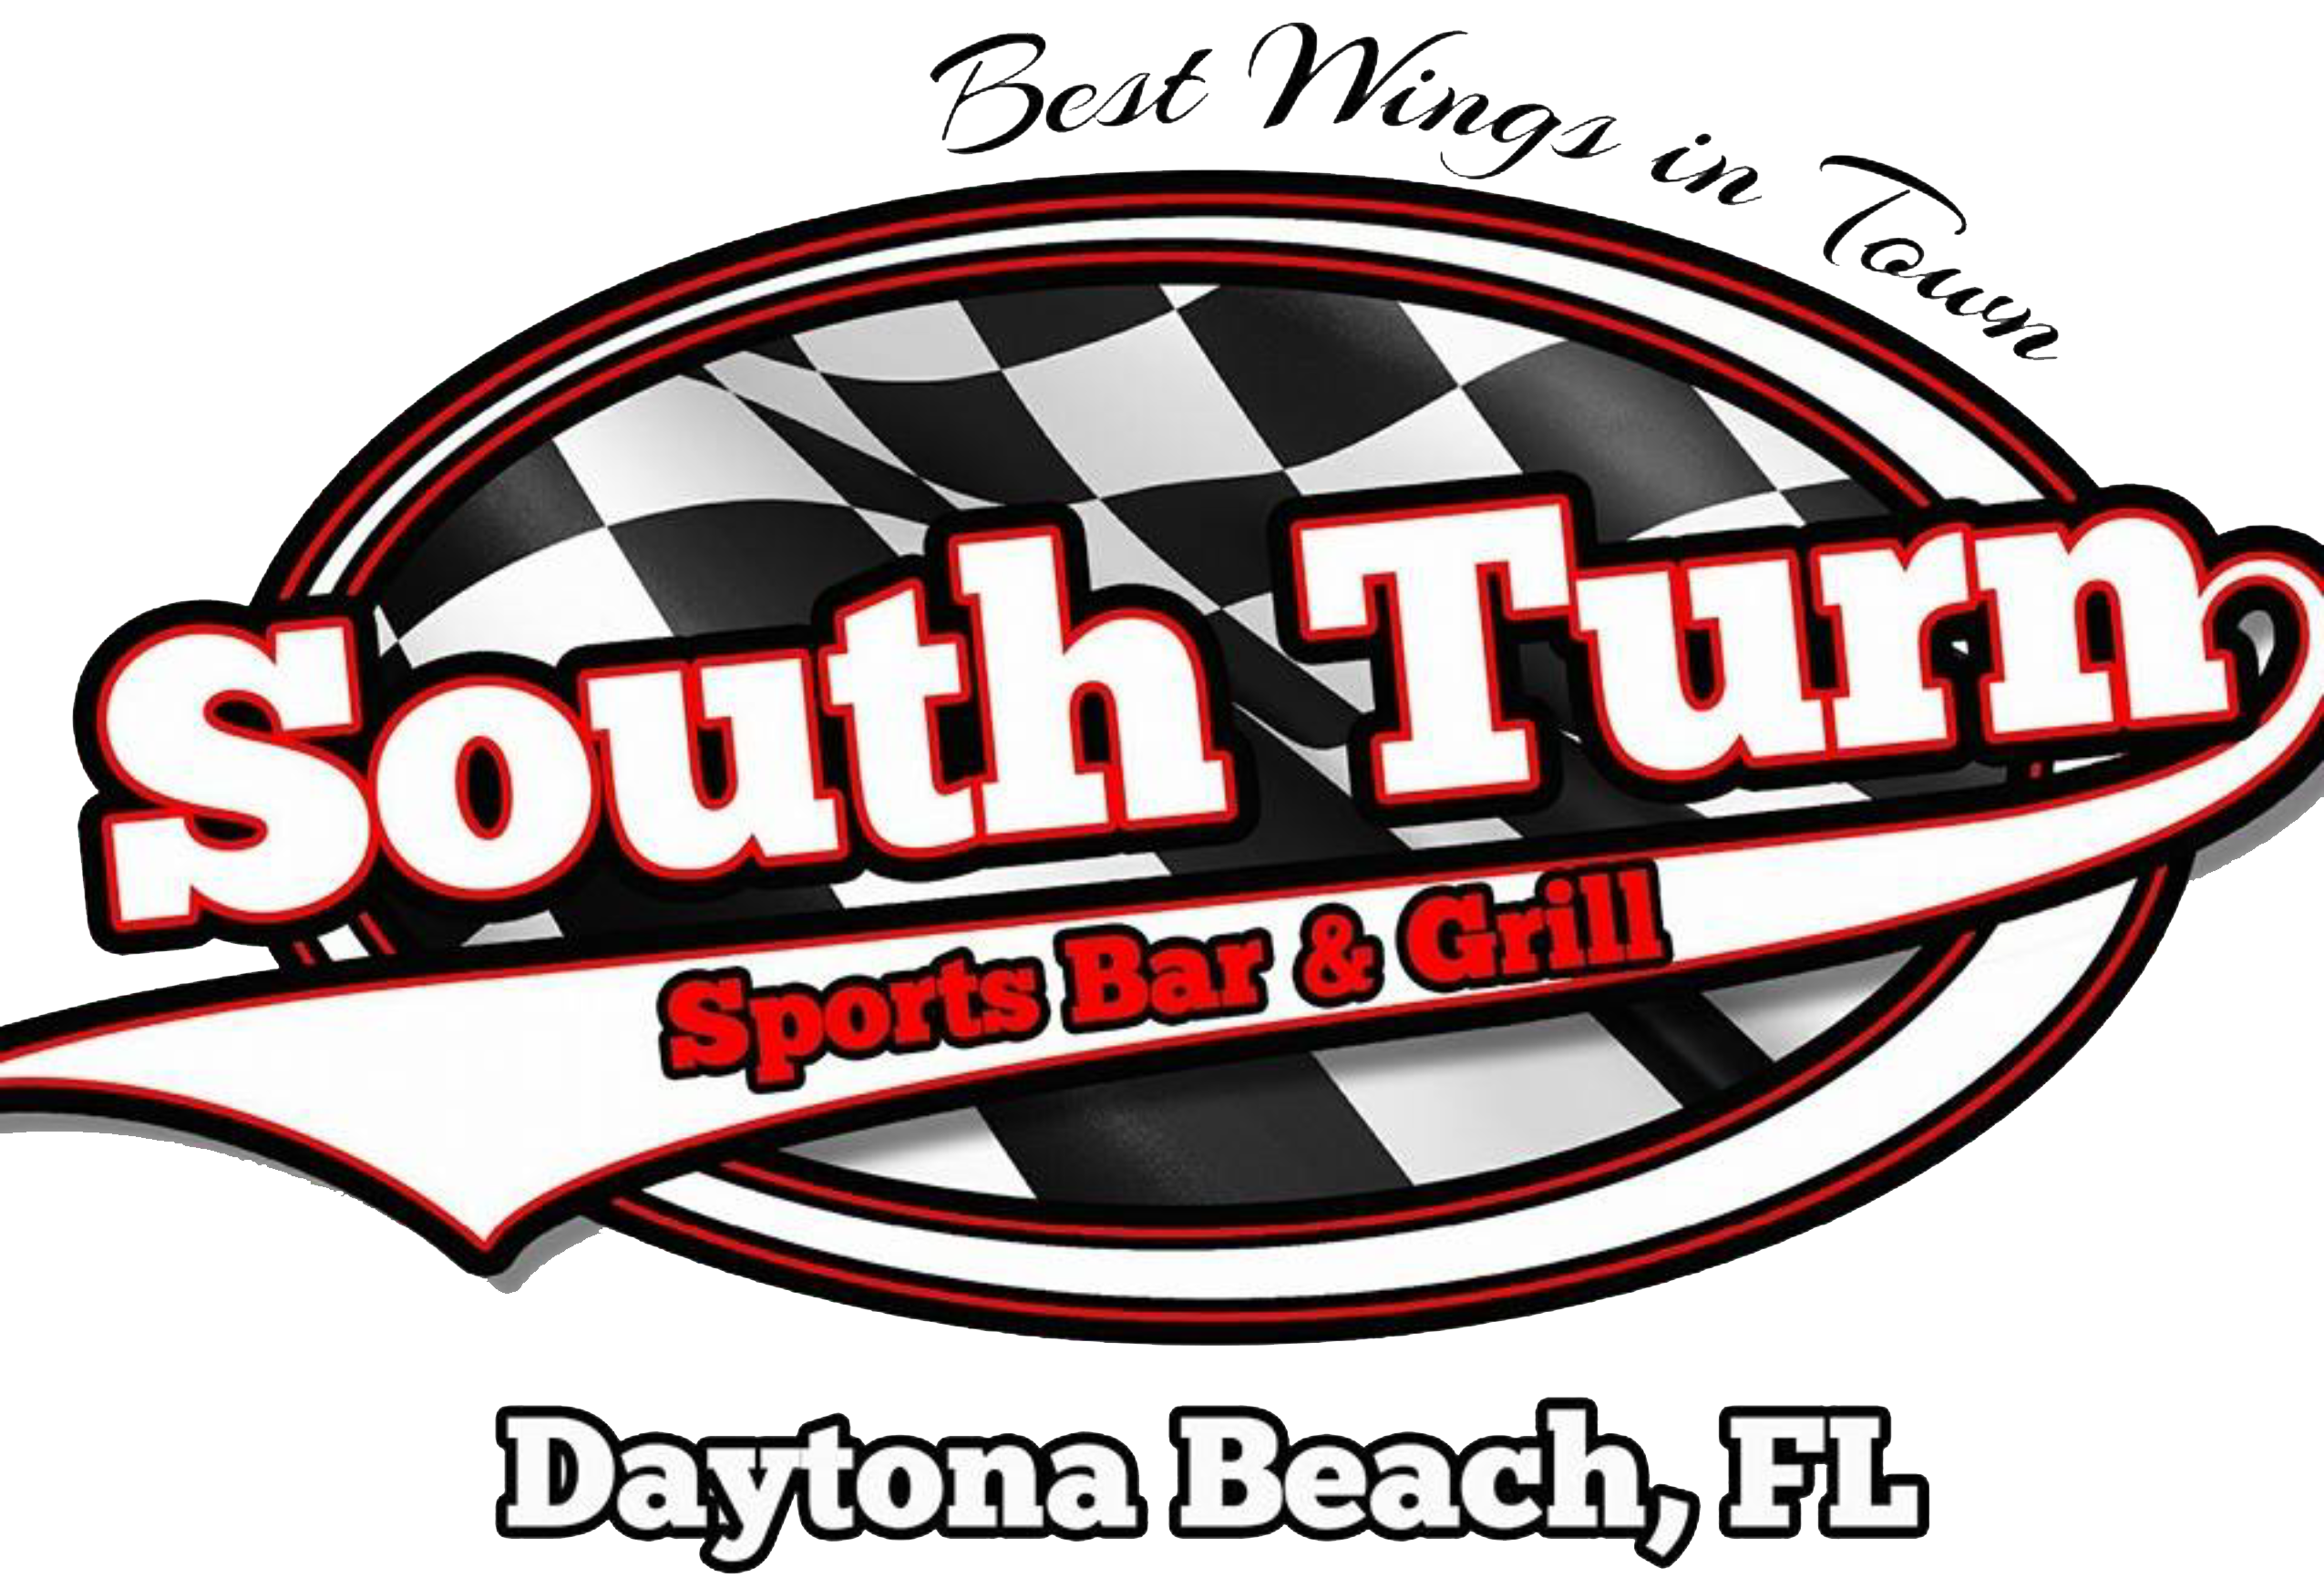 South Turn Bar & Grill Home